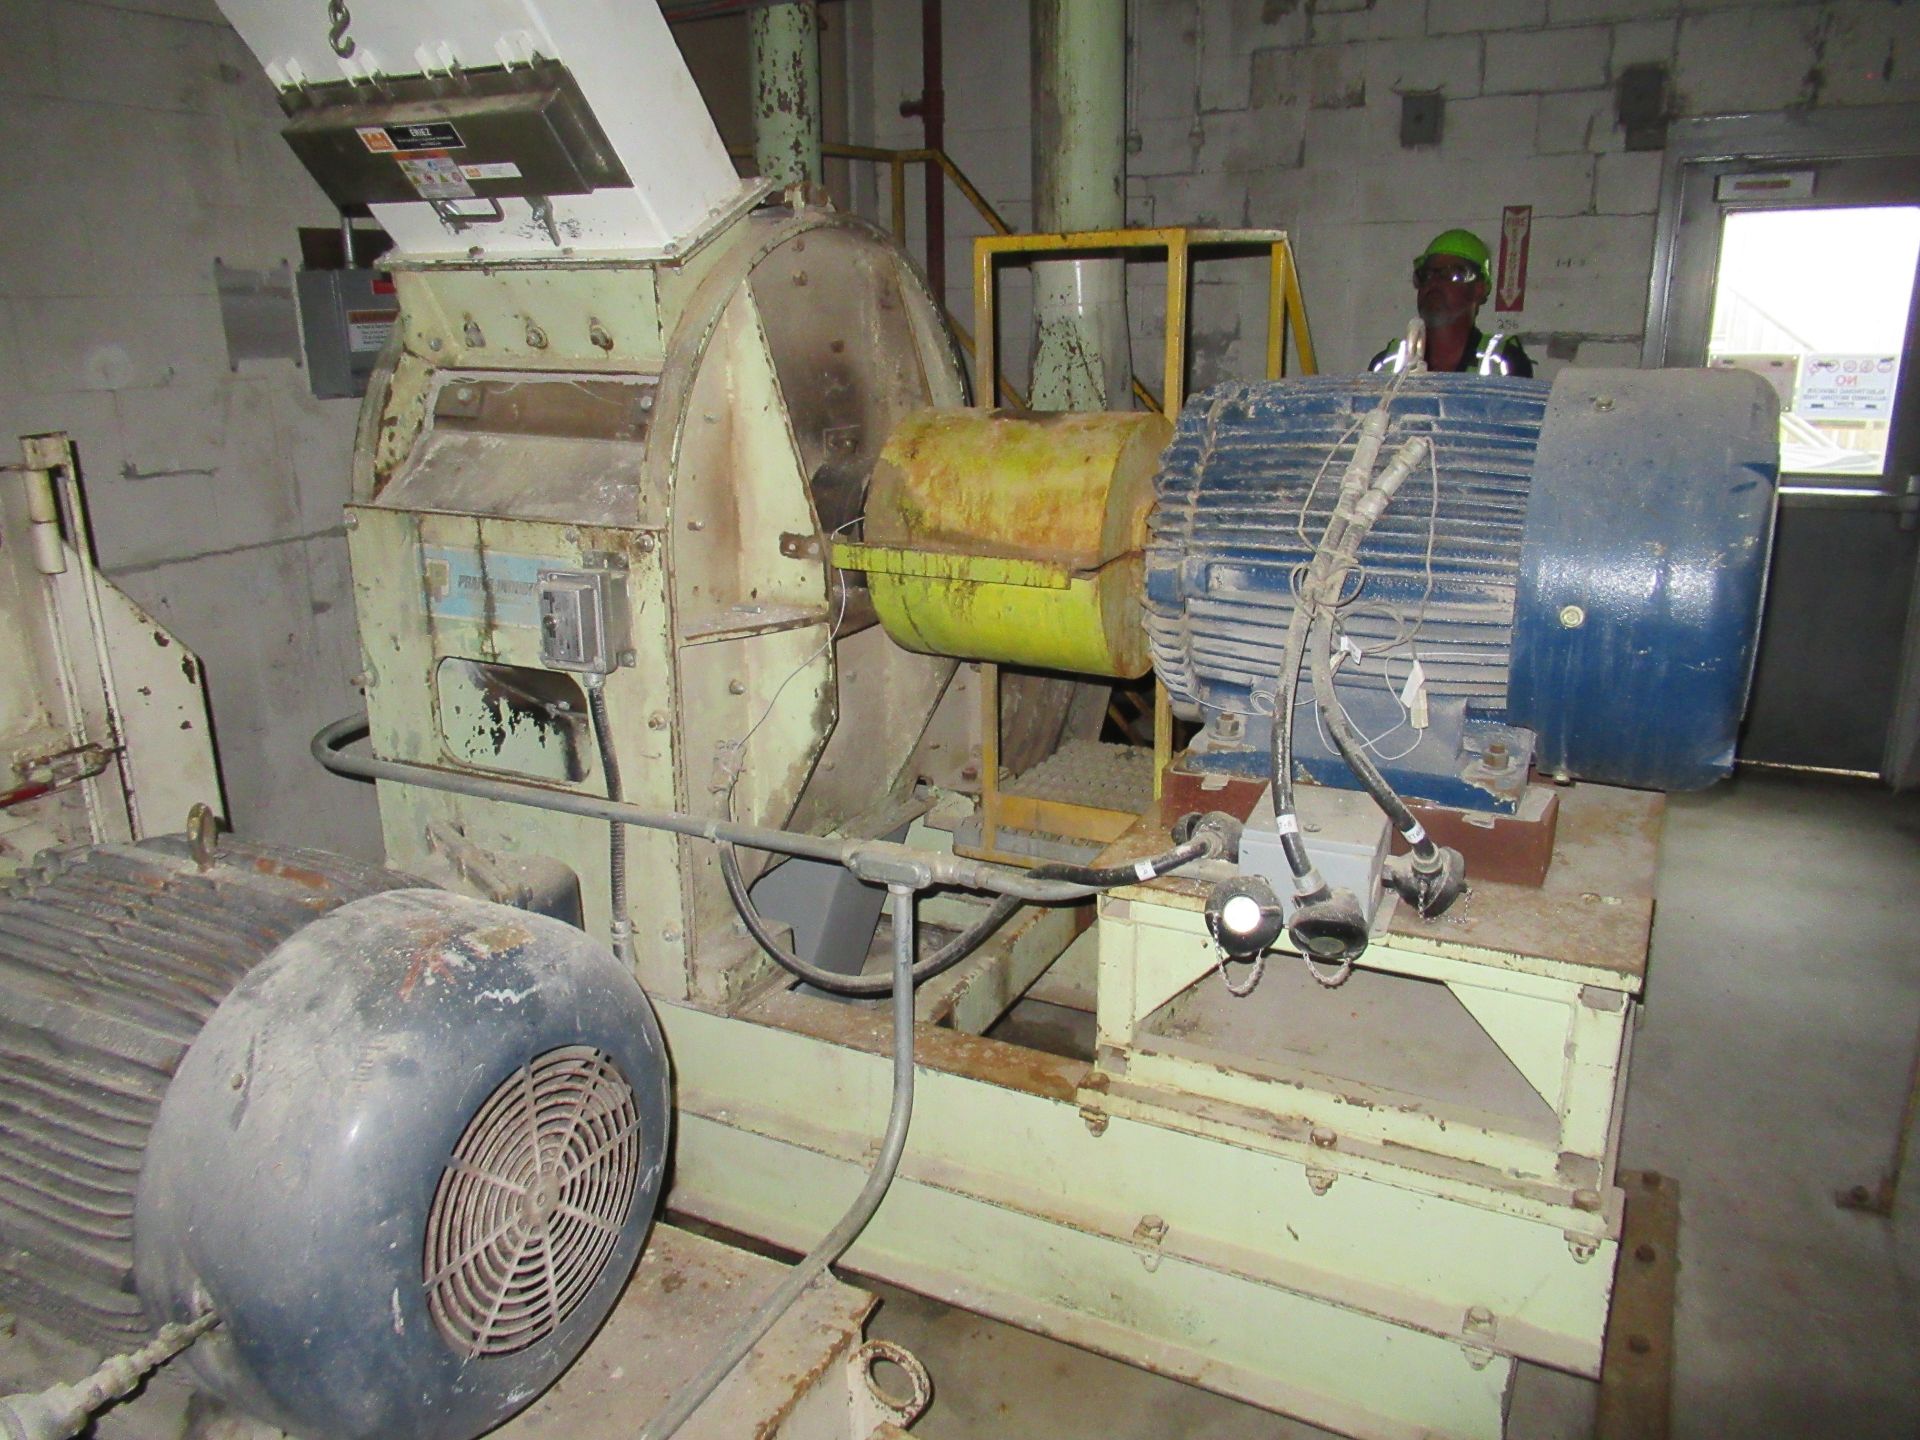 Prater hammer mill, mod G09 SF, s/n 2800, with 100 hp motor [Milling Area]